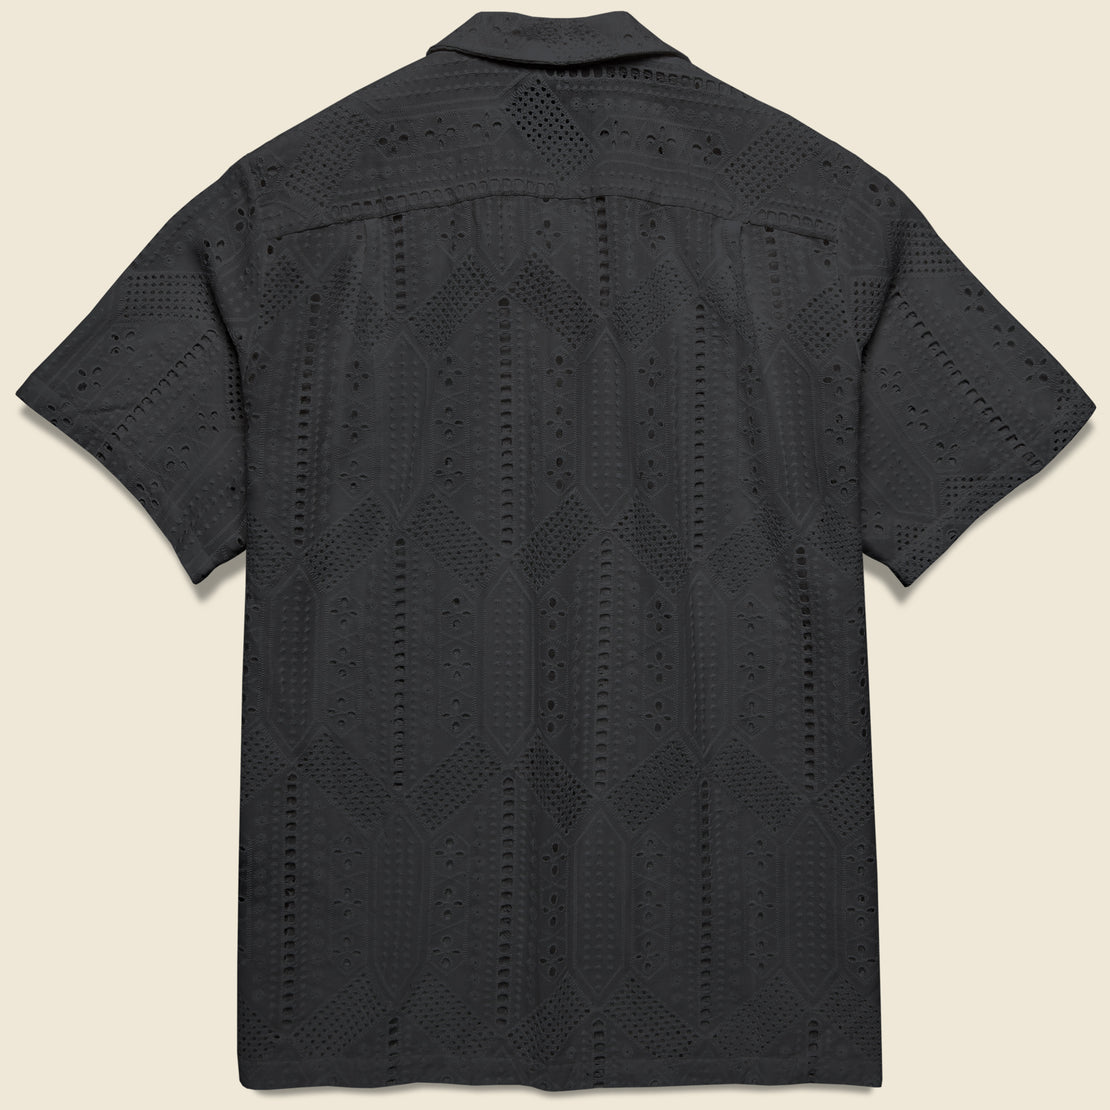 Eyelet Camp Shirt - Black - Portuguese Flannel - STAG Provisions - Tops - S/S Woven - Other Pattern